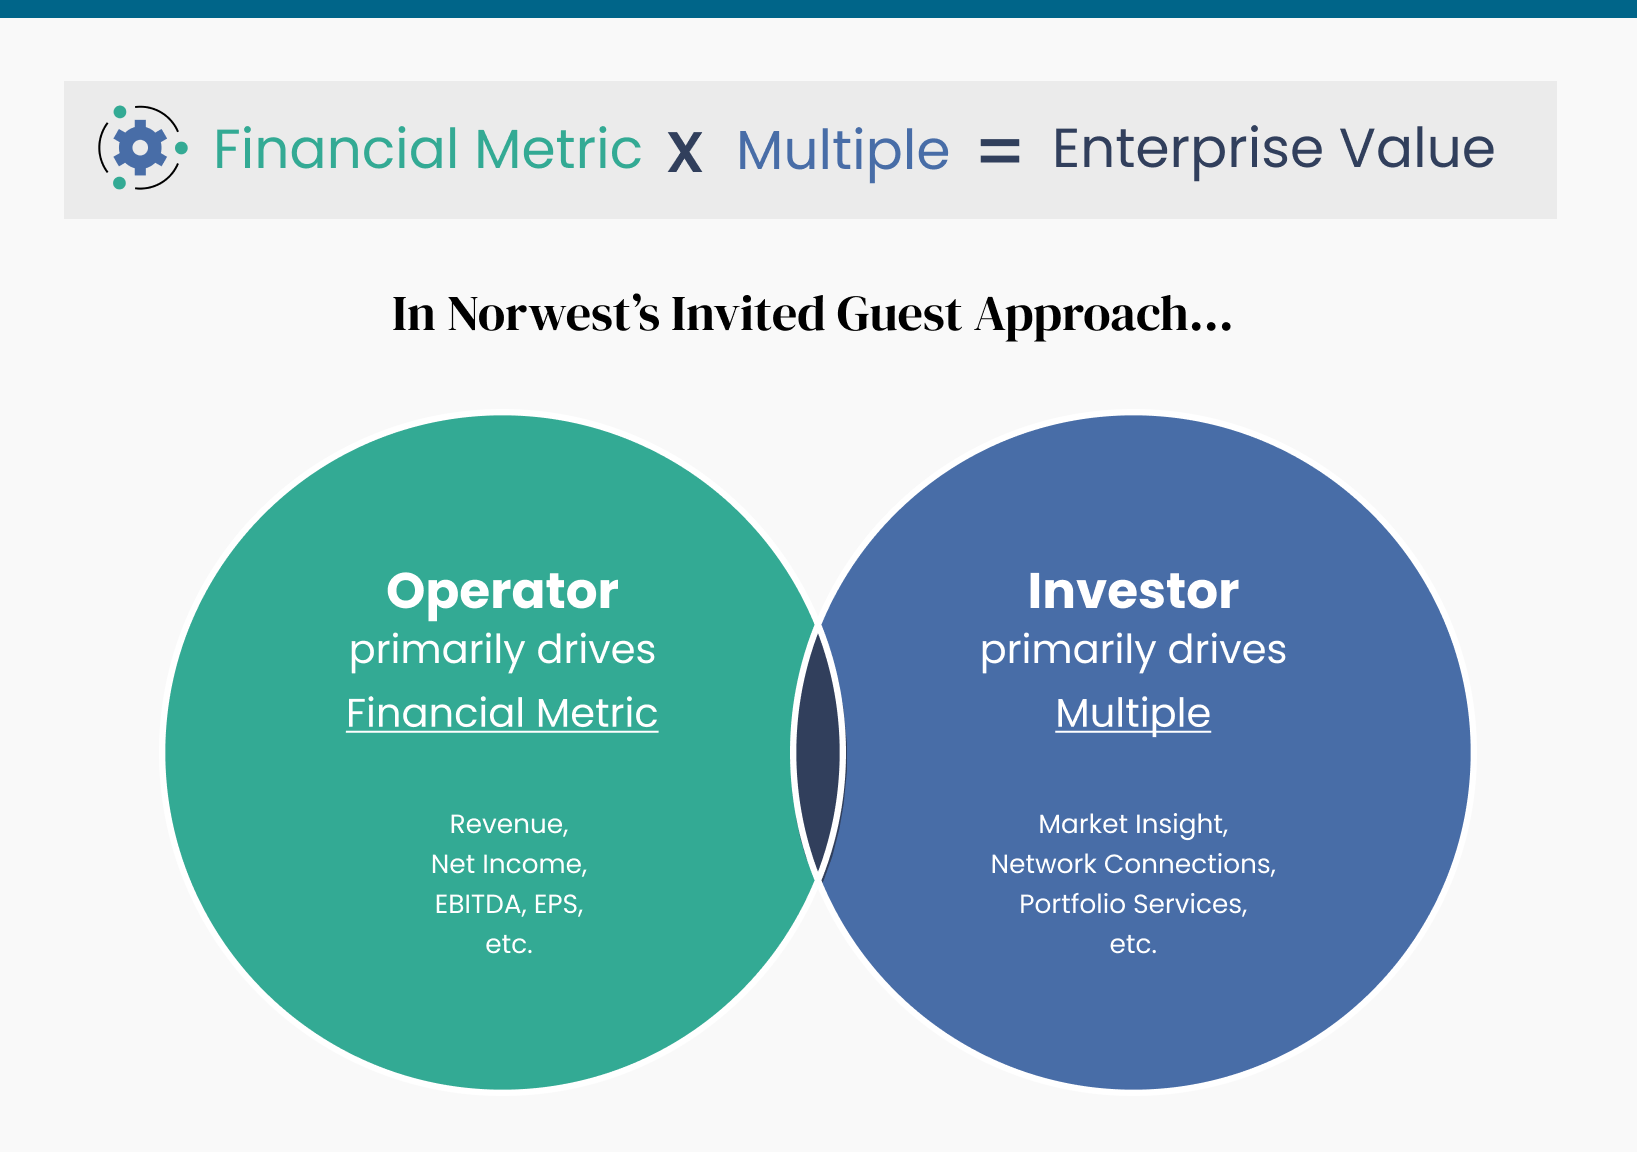 The equation is financial metric times multiple equals enterprise value. The operator primarily drives the financial metric (e.g. revenue, net income, EBITDA, EPS, etc.) whereas the investor primarily drives the multiple (e.g. market insight, network connections, portfolio services, etc.)